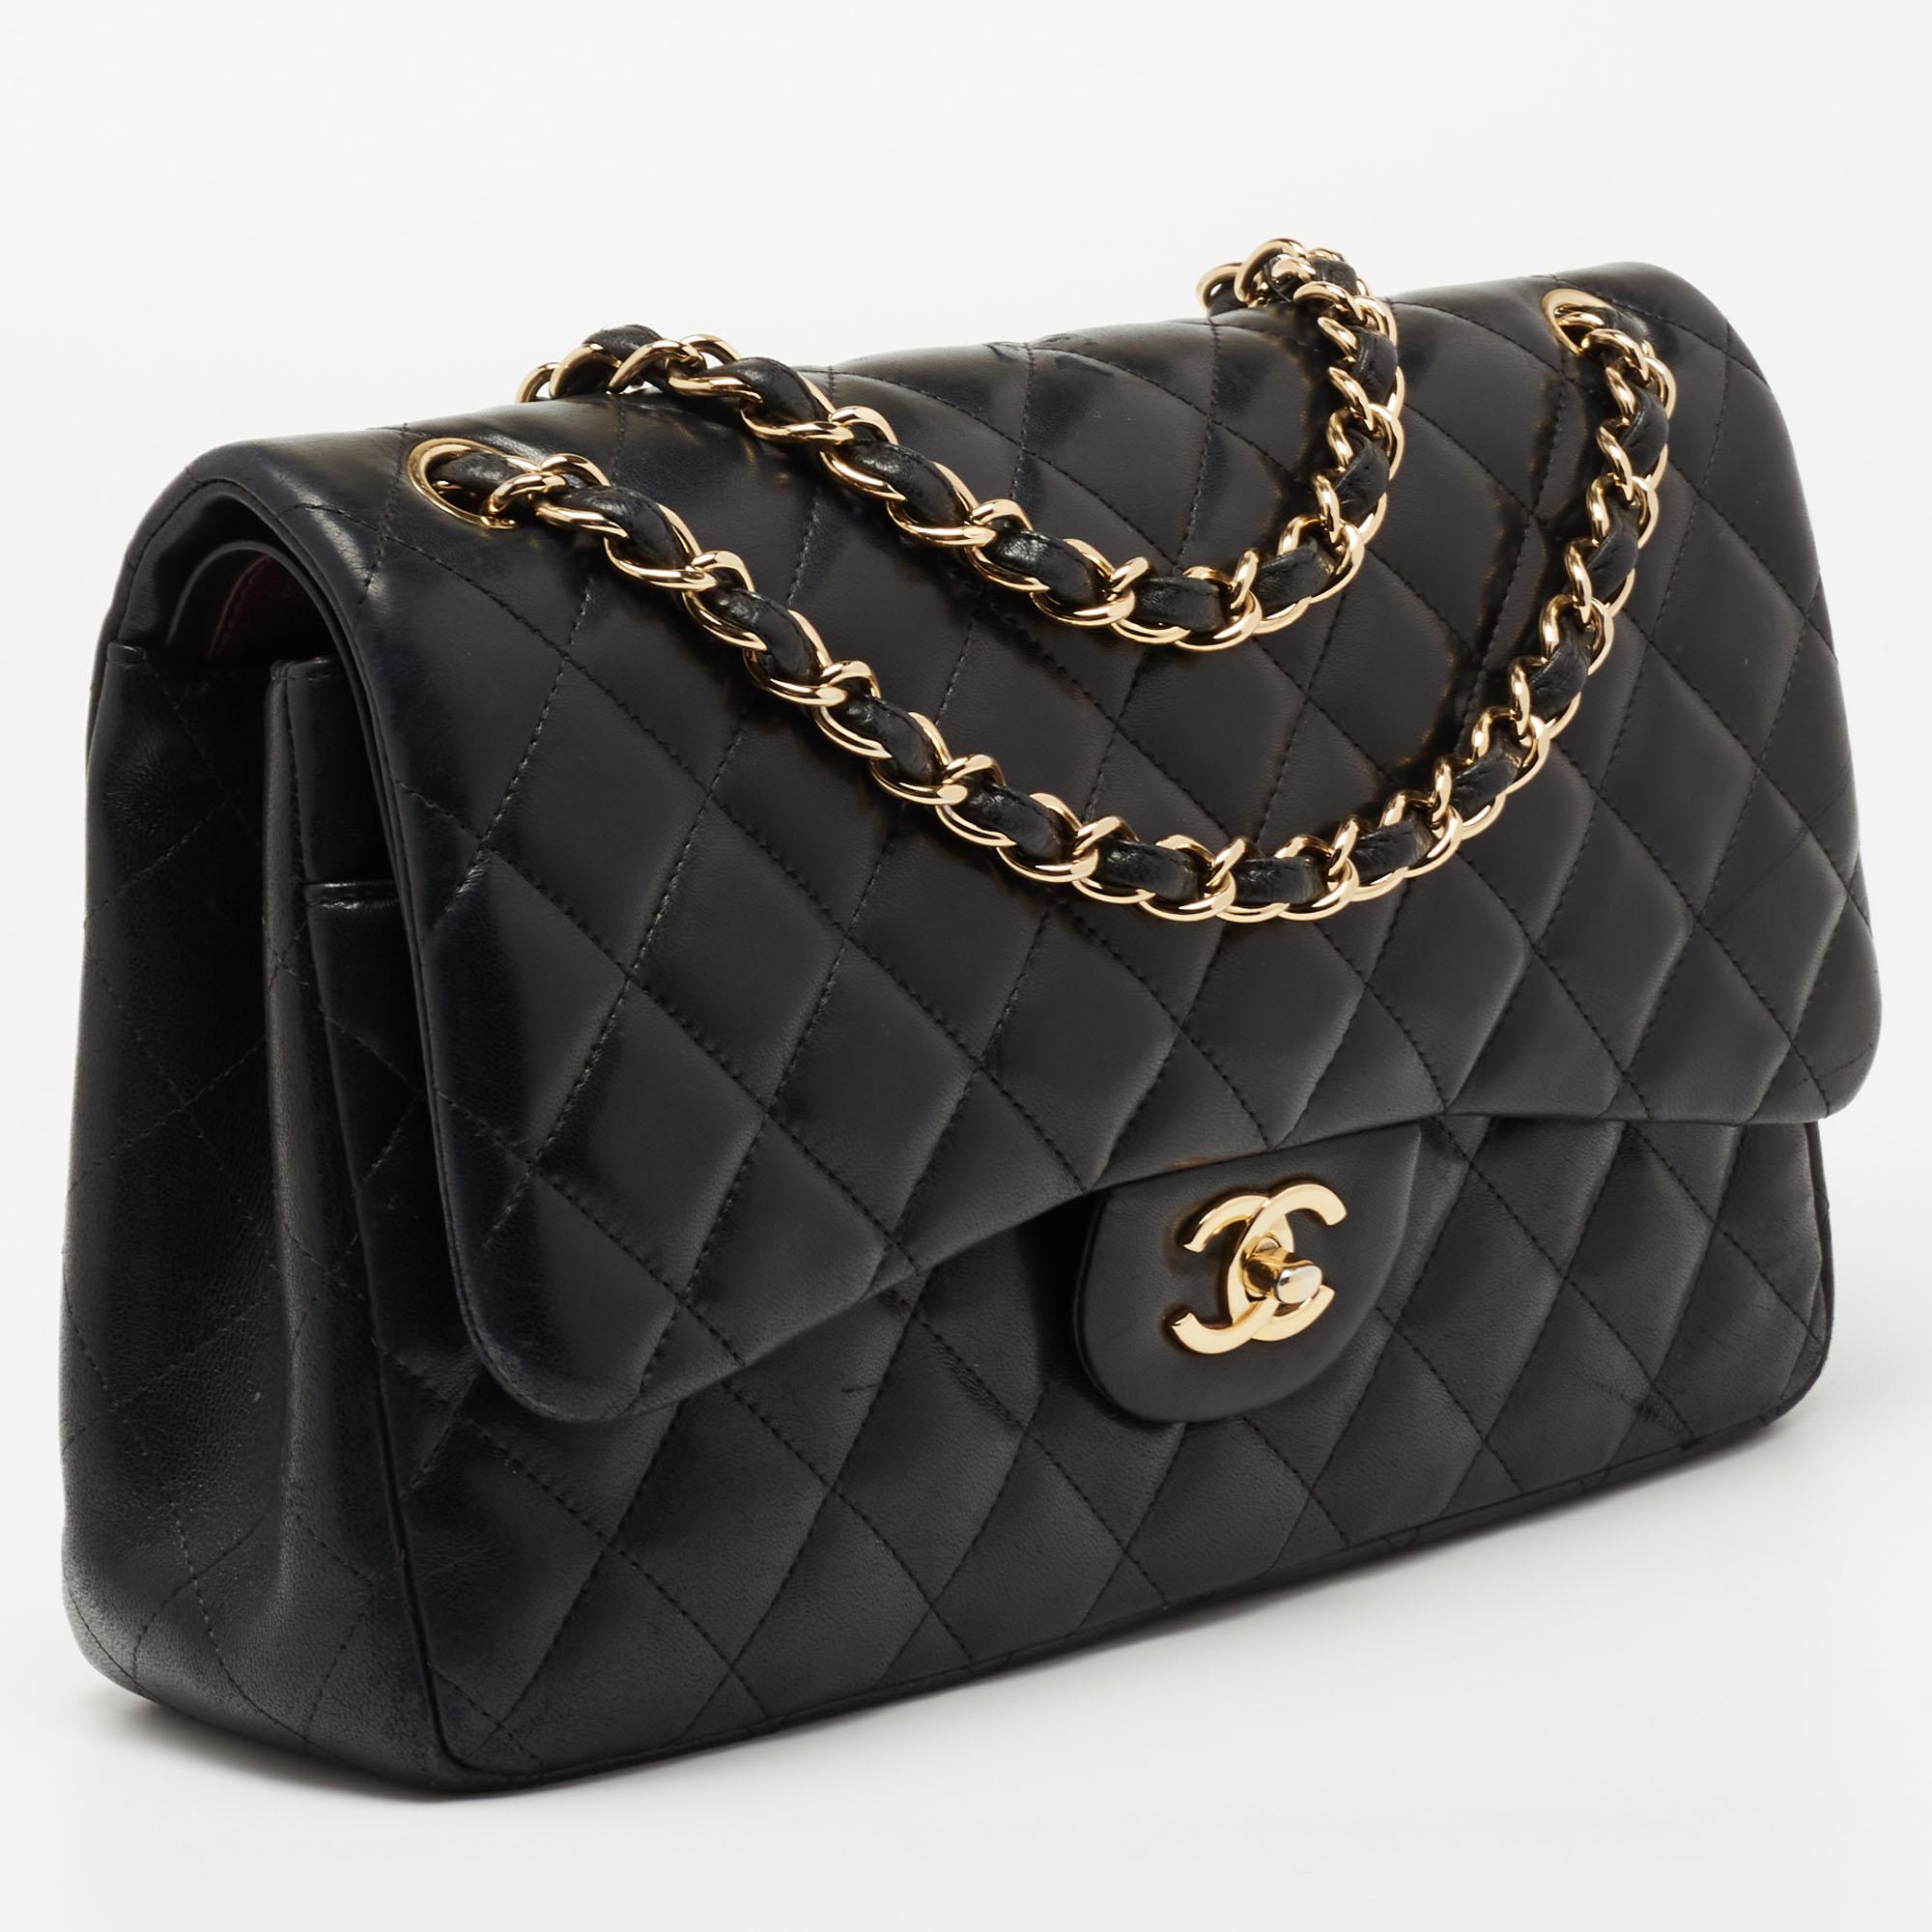 Women's Chanel Black Quilted Leather Jumbo Classic Double Flap Bag